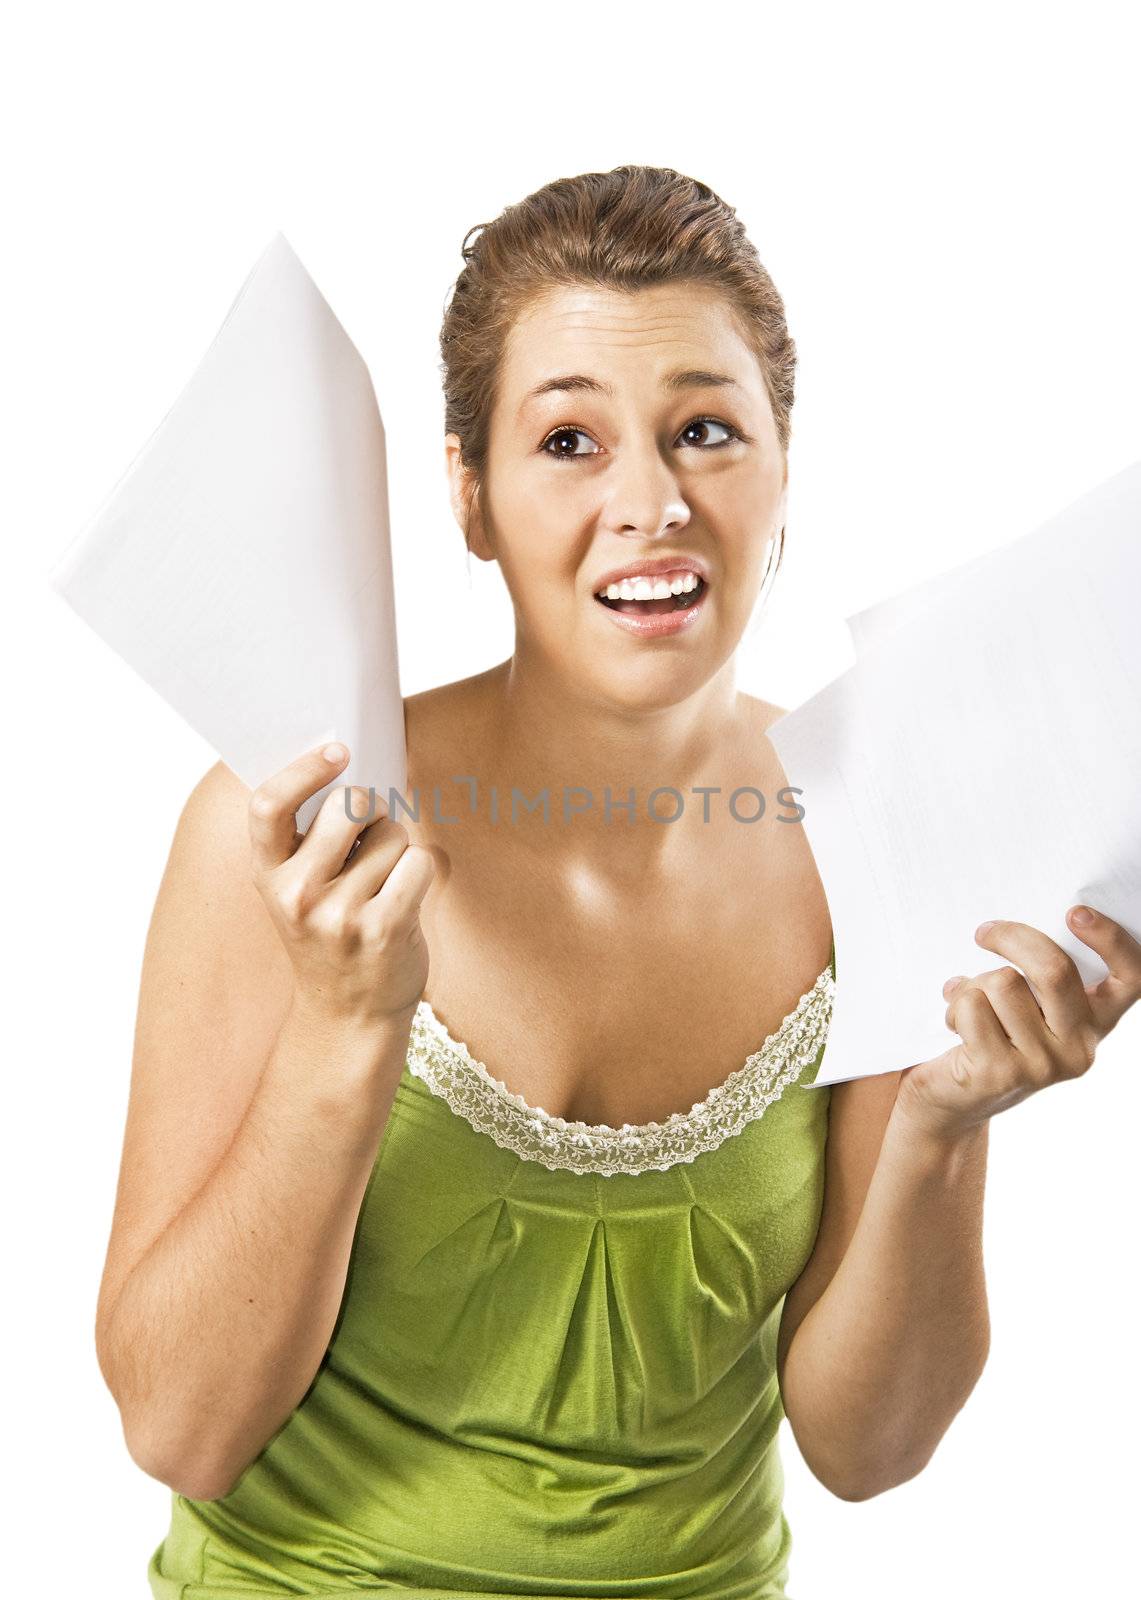 Beautiful young woman being discouraged by a overload of work - on a white background with space for text